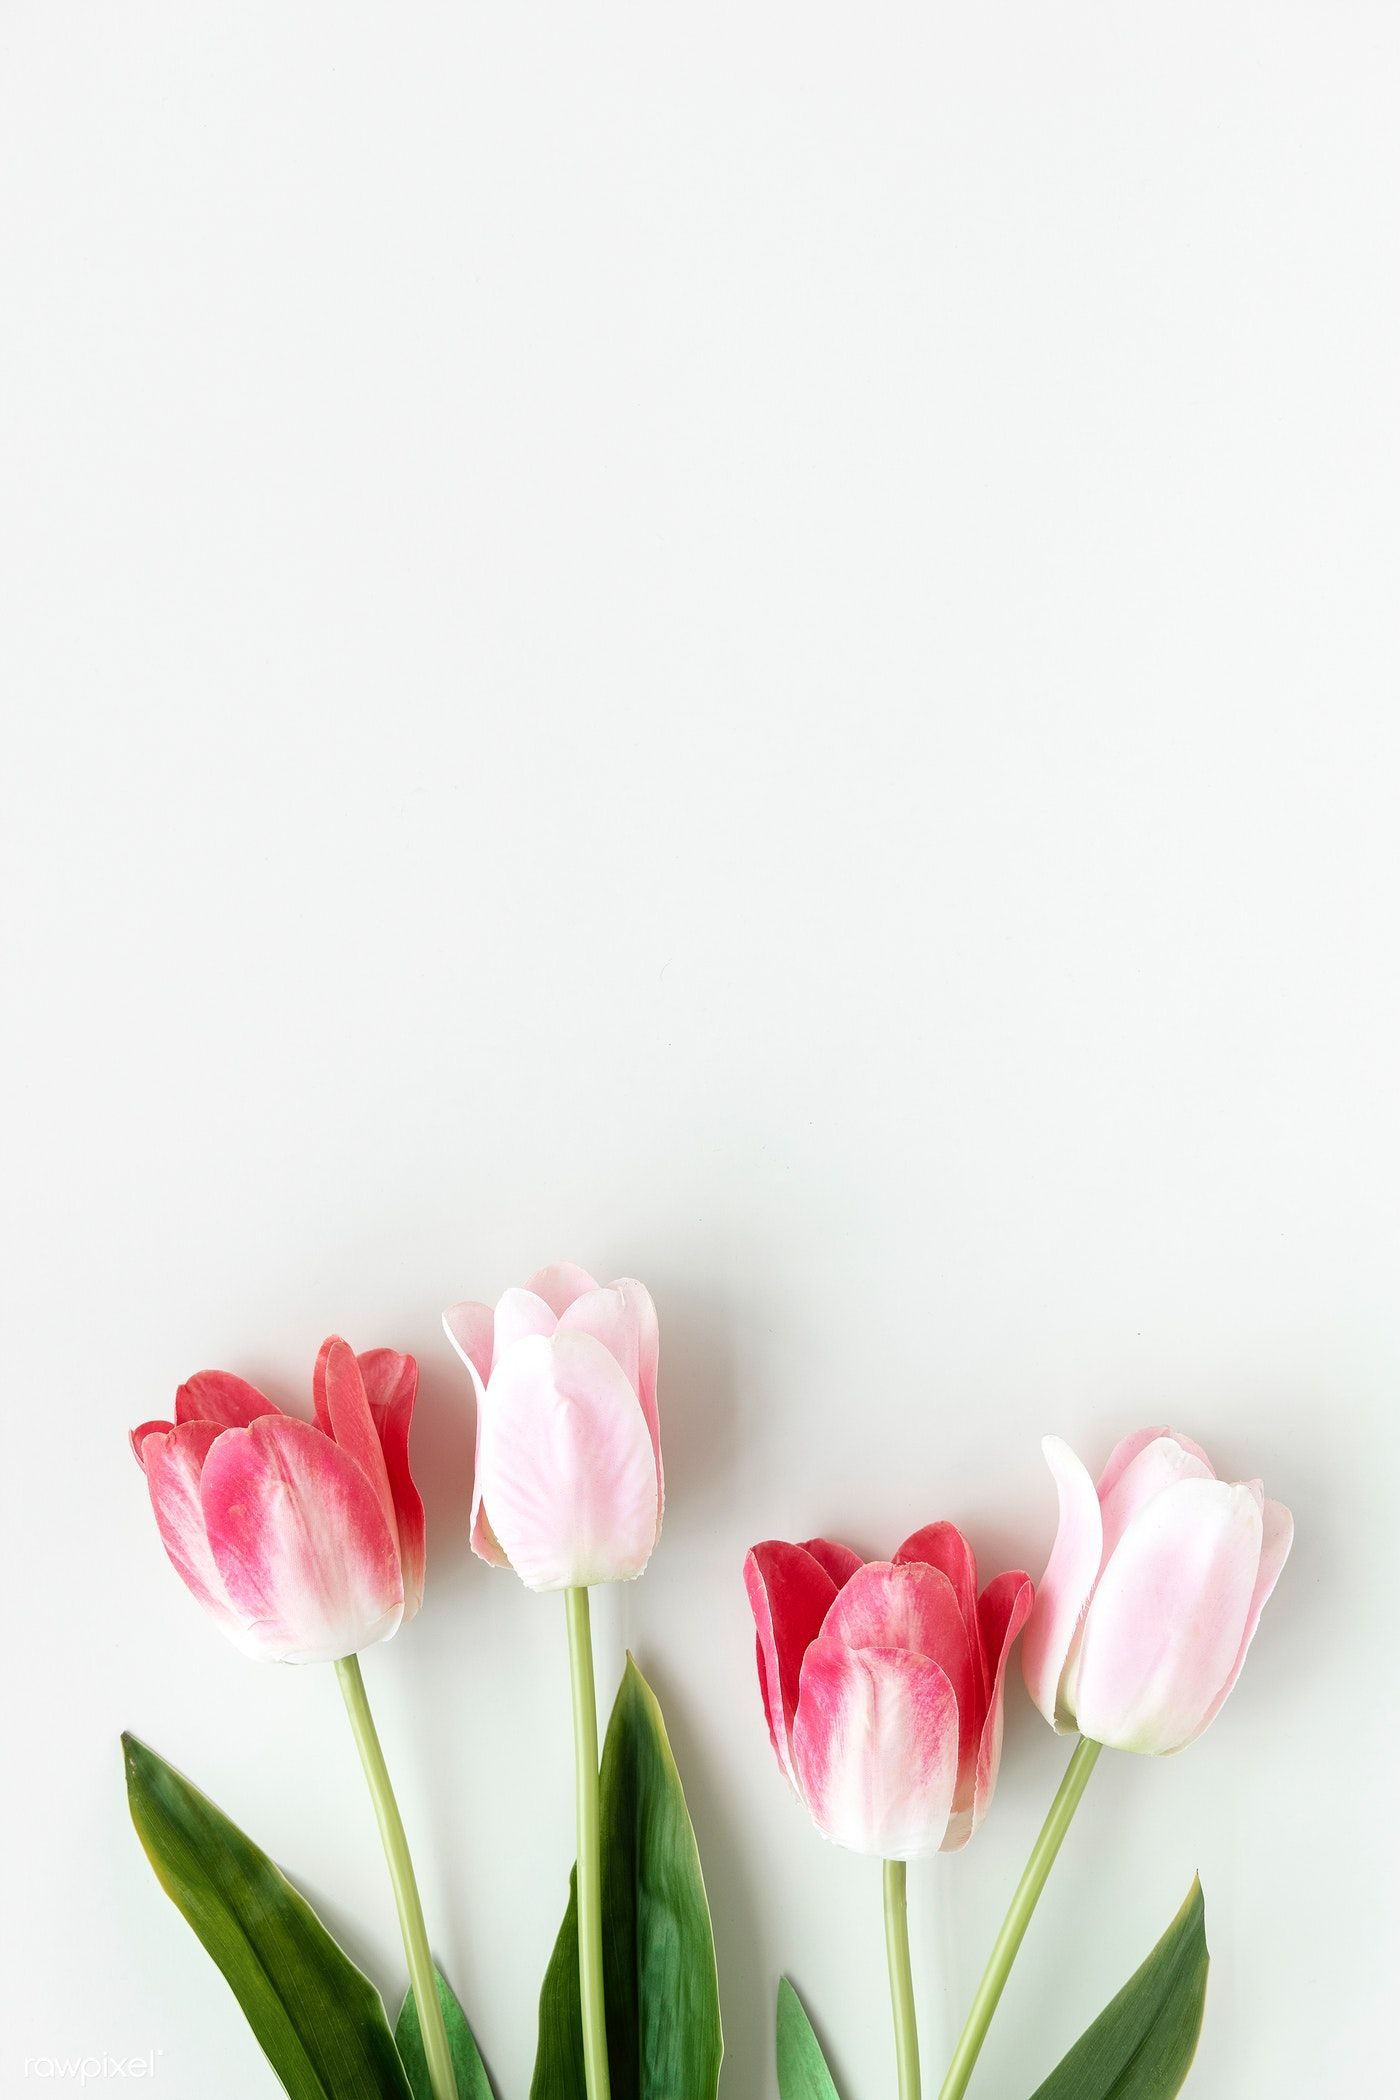 1400x2100 Download premium image of Pink tulips on blank white background template by Ake about tulip, plant flat lay, blank page flower, flat lay, and blossom flatlay 1204253